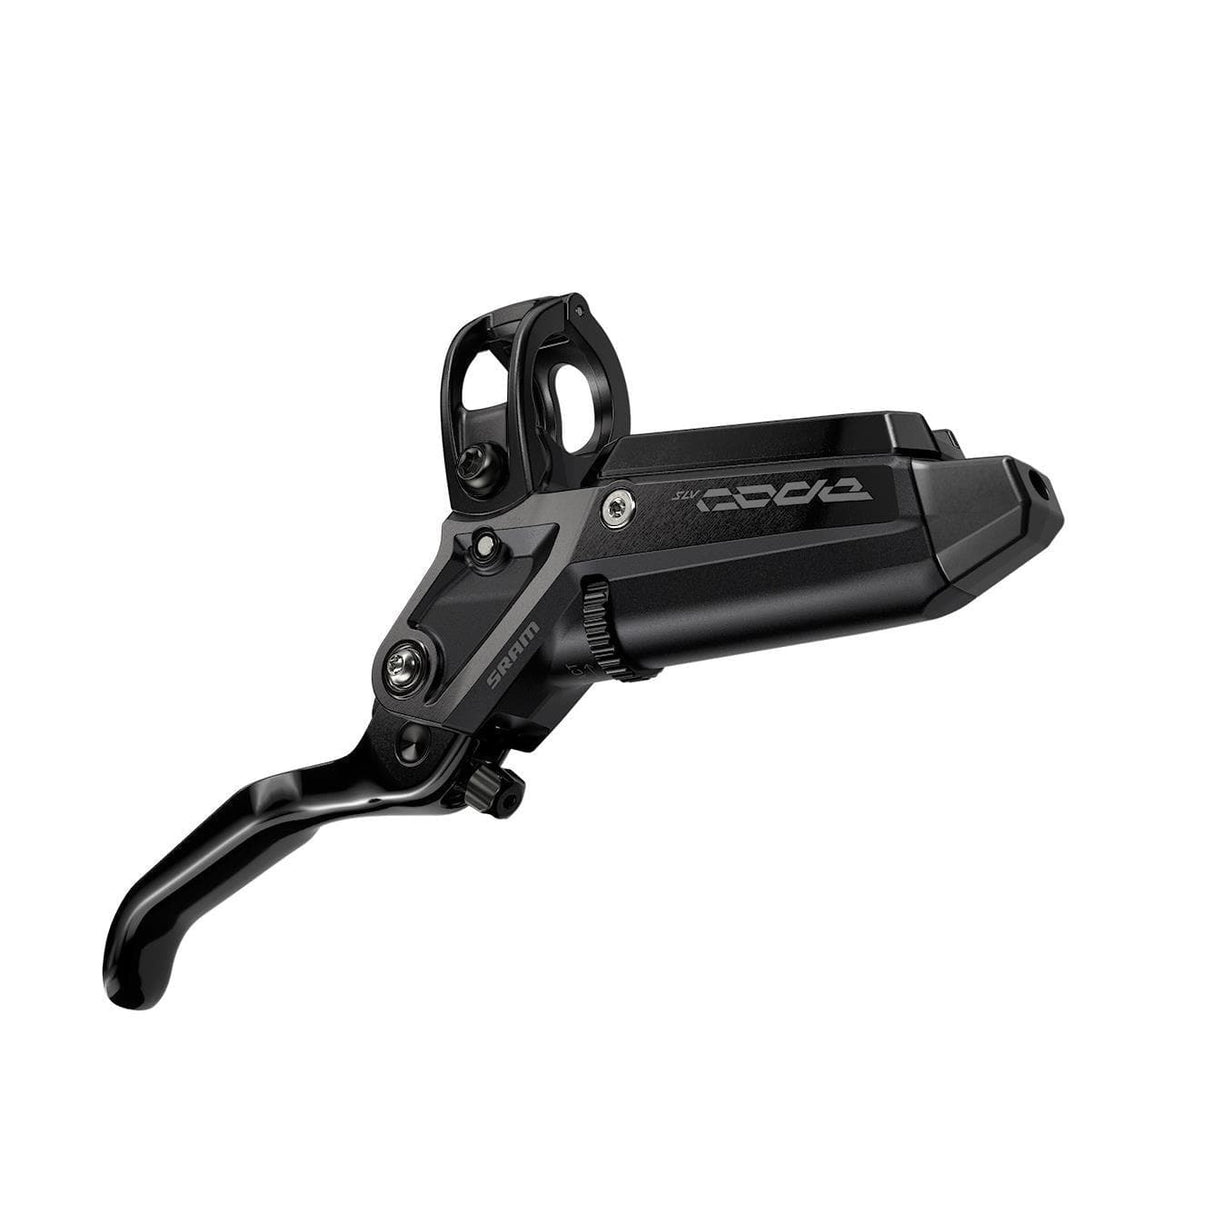 Sram - Disc Brake Code Silver Stealth - Aluminum Lever, Stainless Hardware, Reach/Contact Adj ,Swinglink, Front Hose (Includes Mmx Clamp, Rotor/Bracket Sold Separately)C1: Black Ano 2000Mm